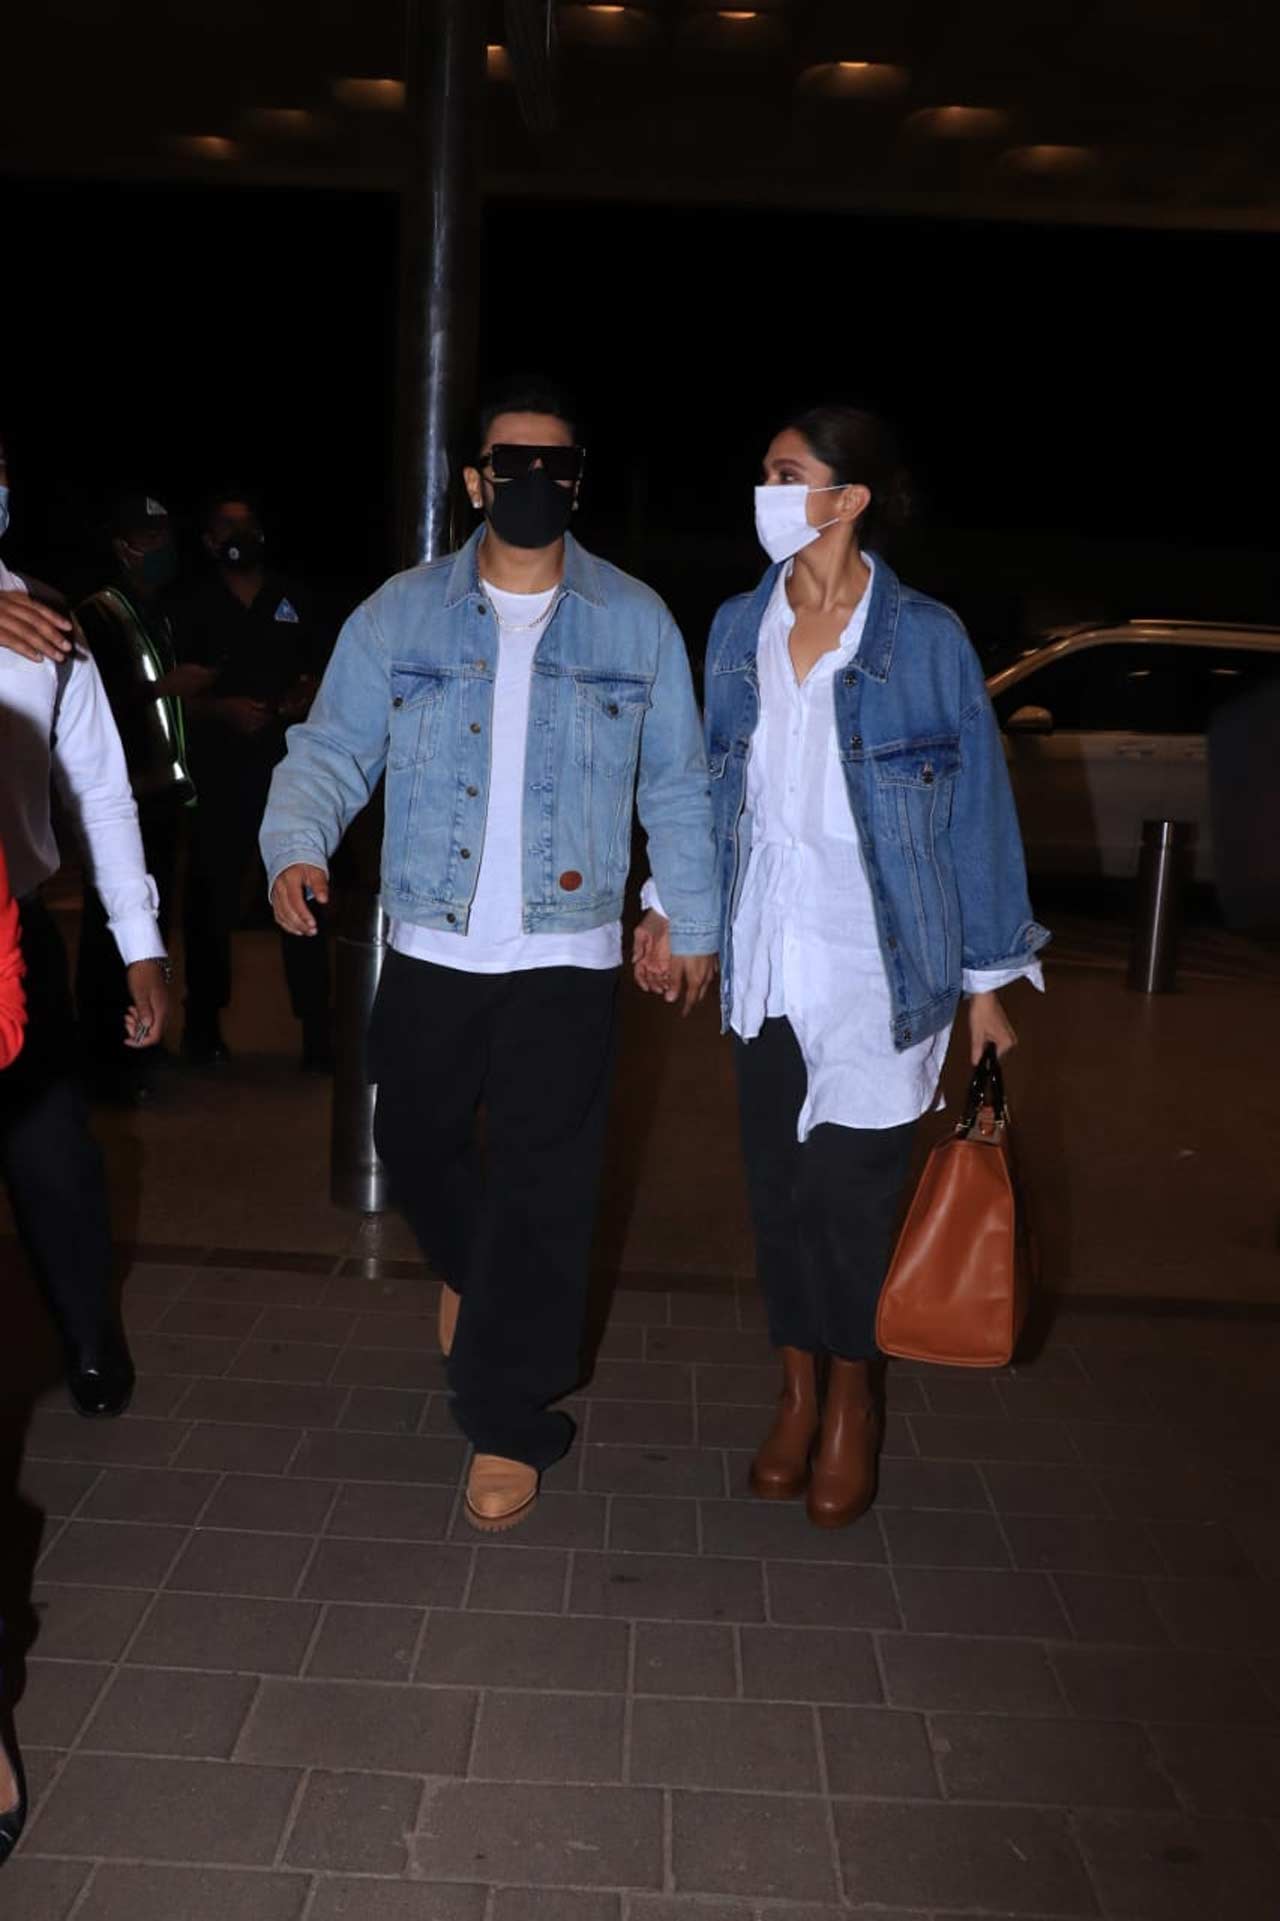 Deepika Padukone and Ranveer Singh were clicked twinning at the Mumbai airport. The duo was snapped sported a denim jacket, paired with a white casual shirt and black pants. On the work front, DeepVeer will once again sizzle on the screen with their appearance in Kabir Khan's 83 film. All pictures/Yogen shah